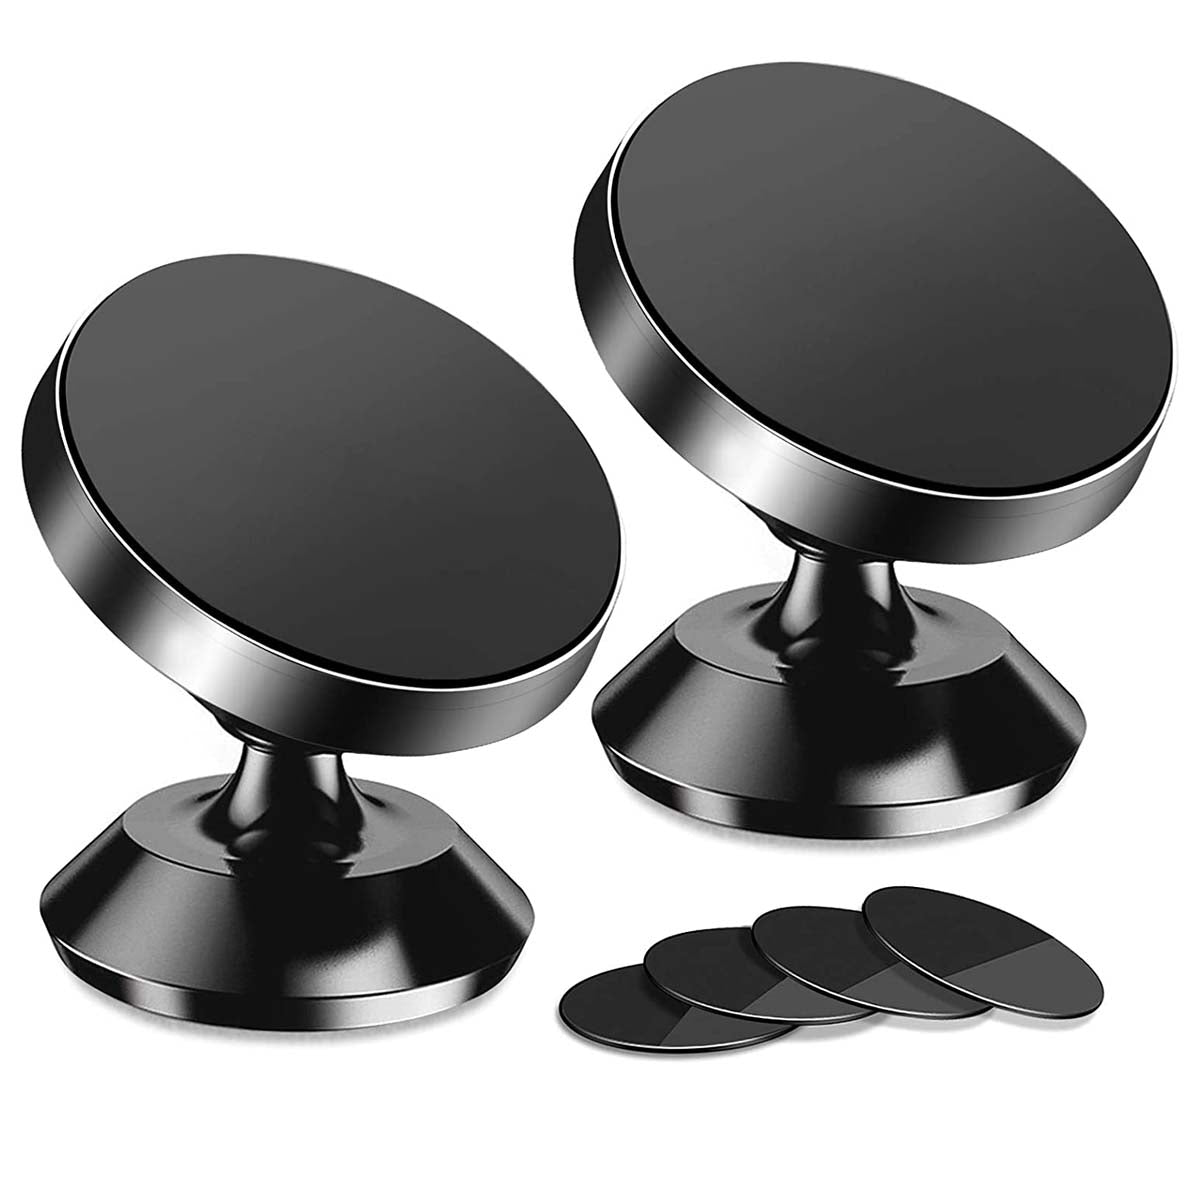 [2 Pack ] Magnetic Phone Mount, Custom For Cars, [ Super Strong Magnet ] [ with 4 Metal Plate ] car Magnetic Phone Holder, [ 360° Rotation ] Universal Dashboard car Mount Fits All Cell Phones, Car Accessories TS13982